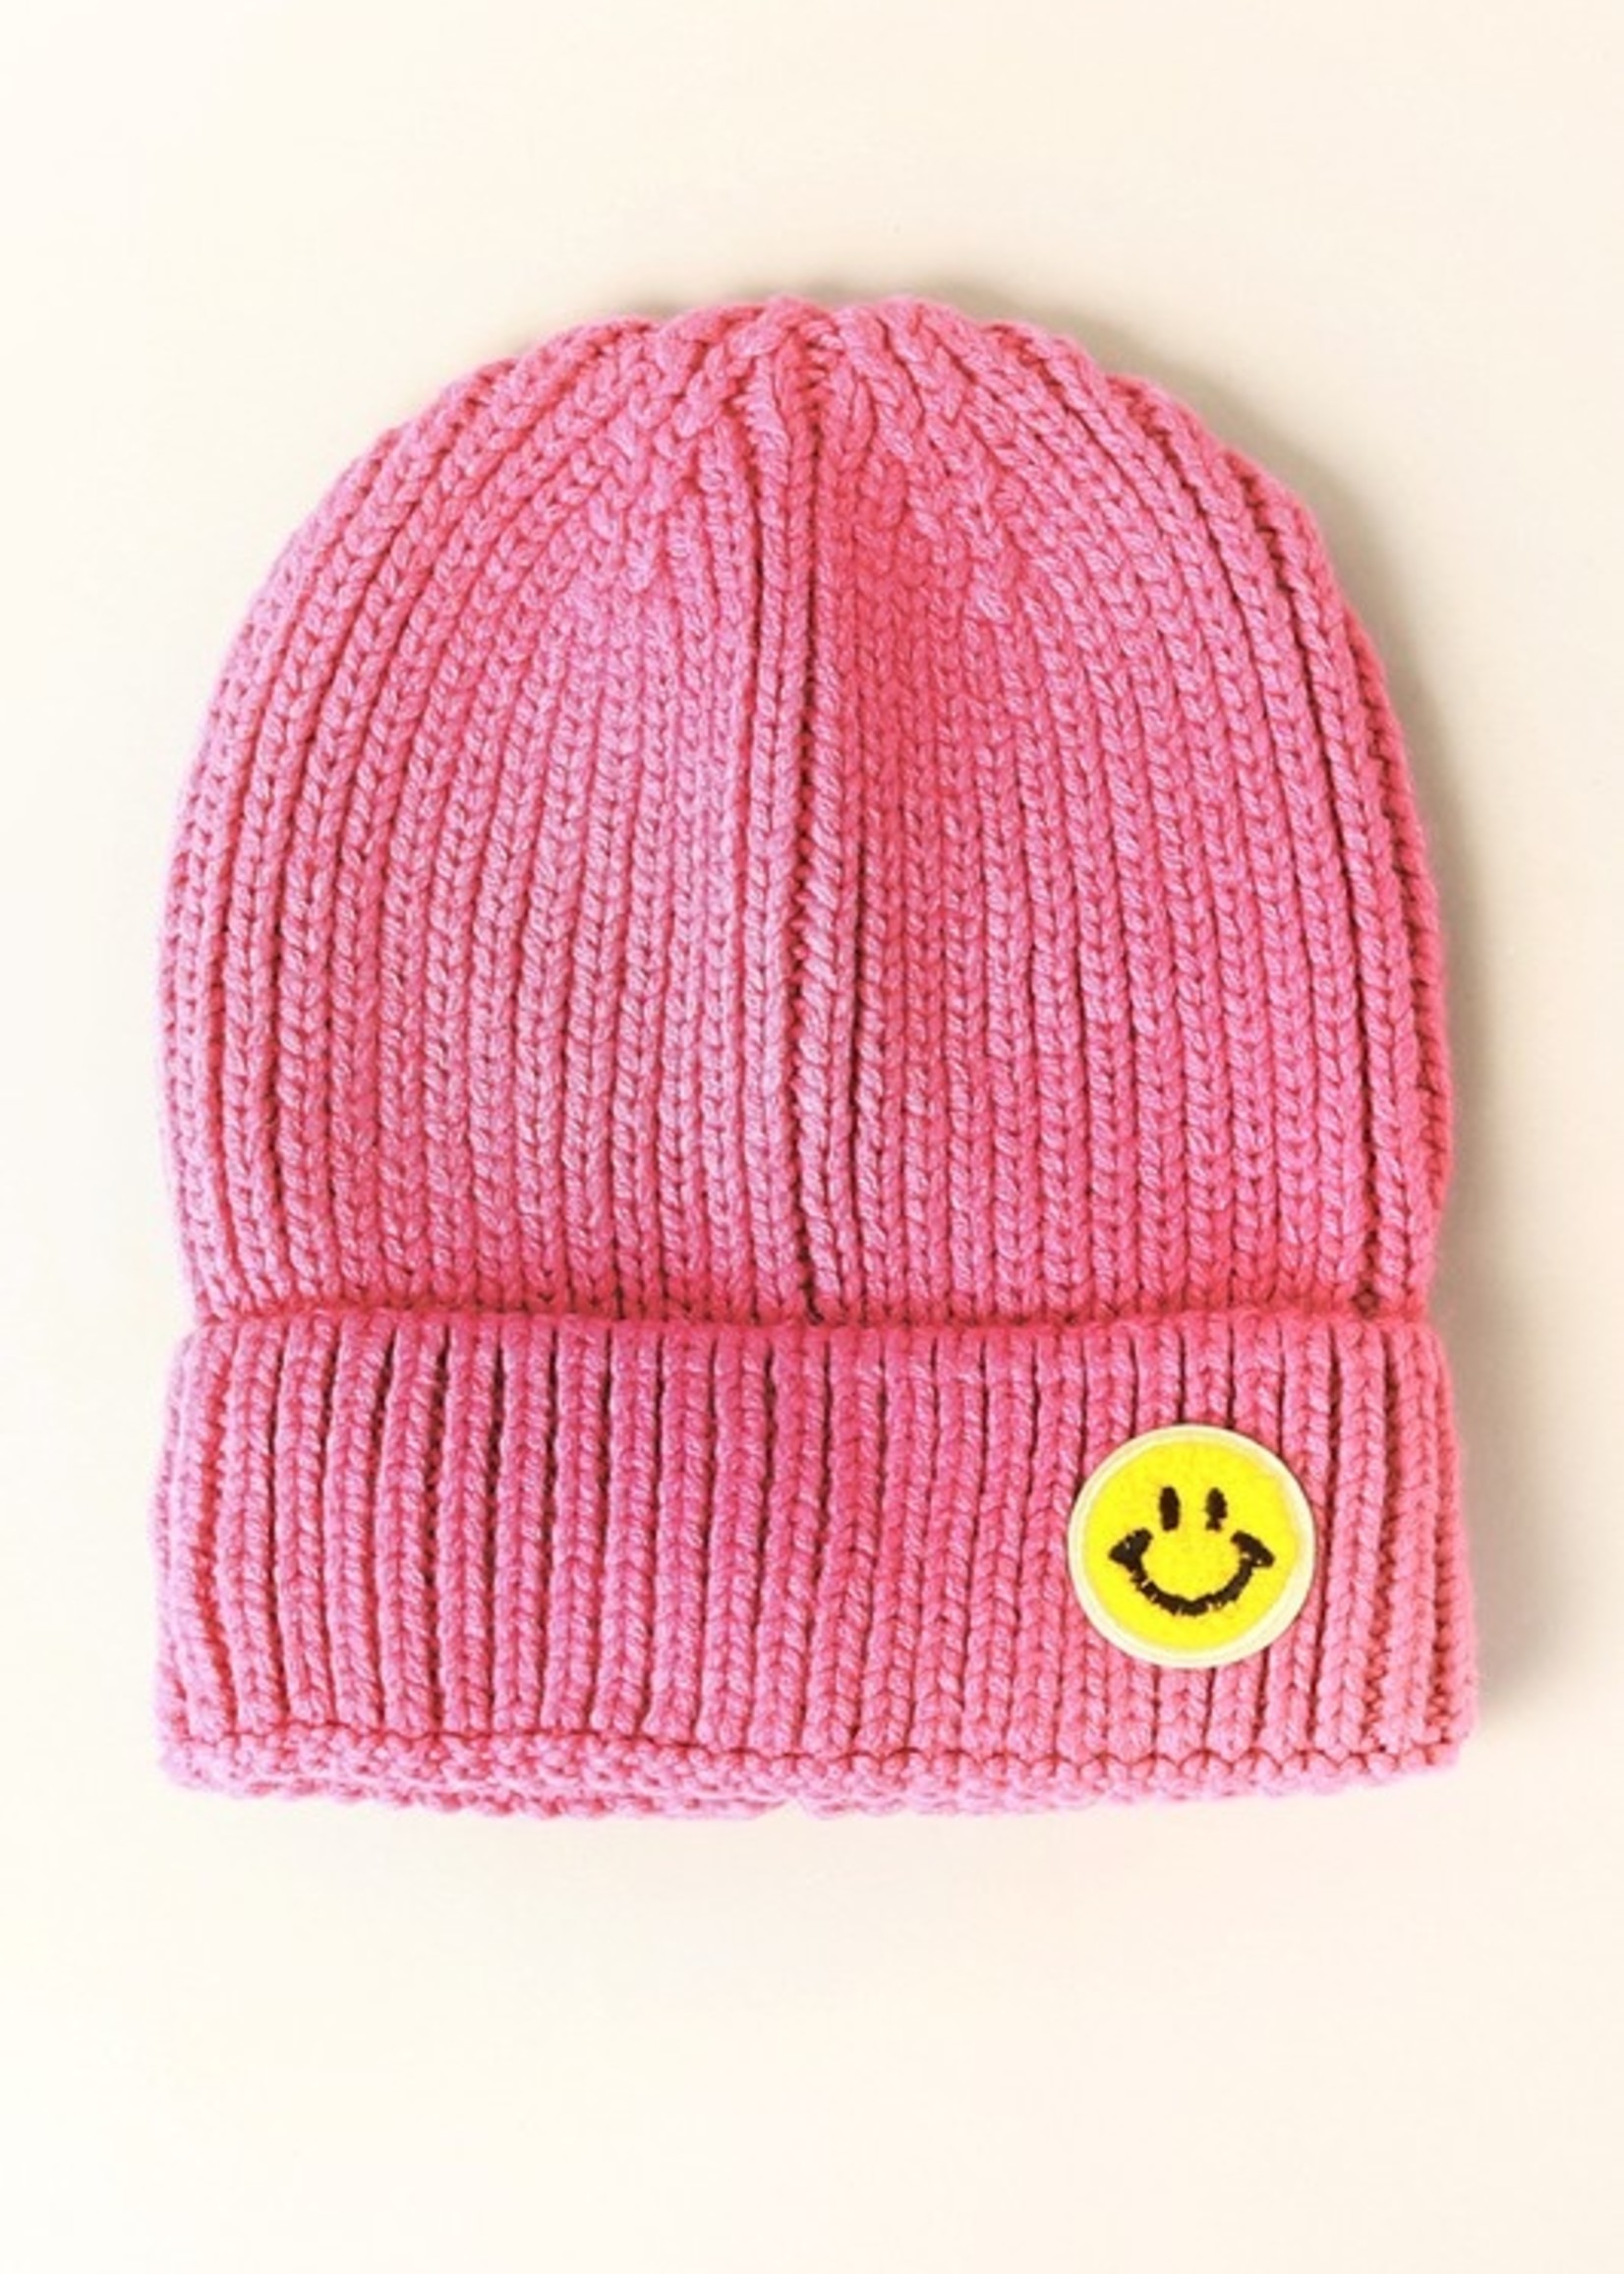 Smiley face hat